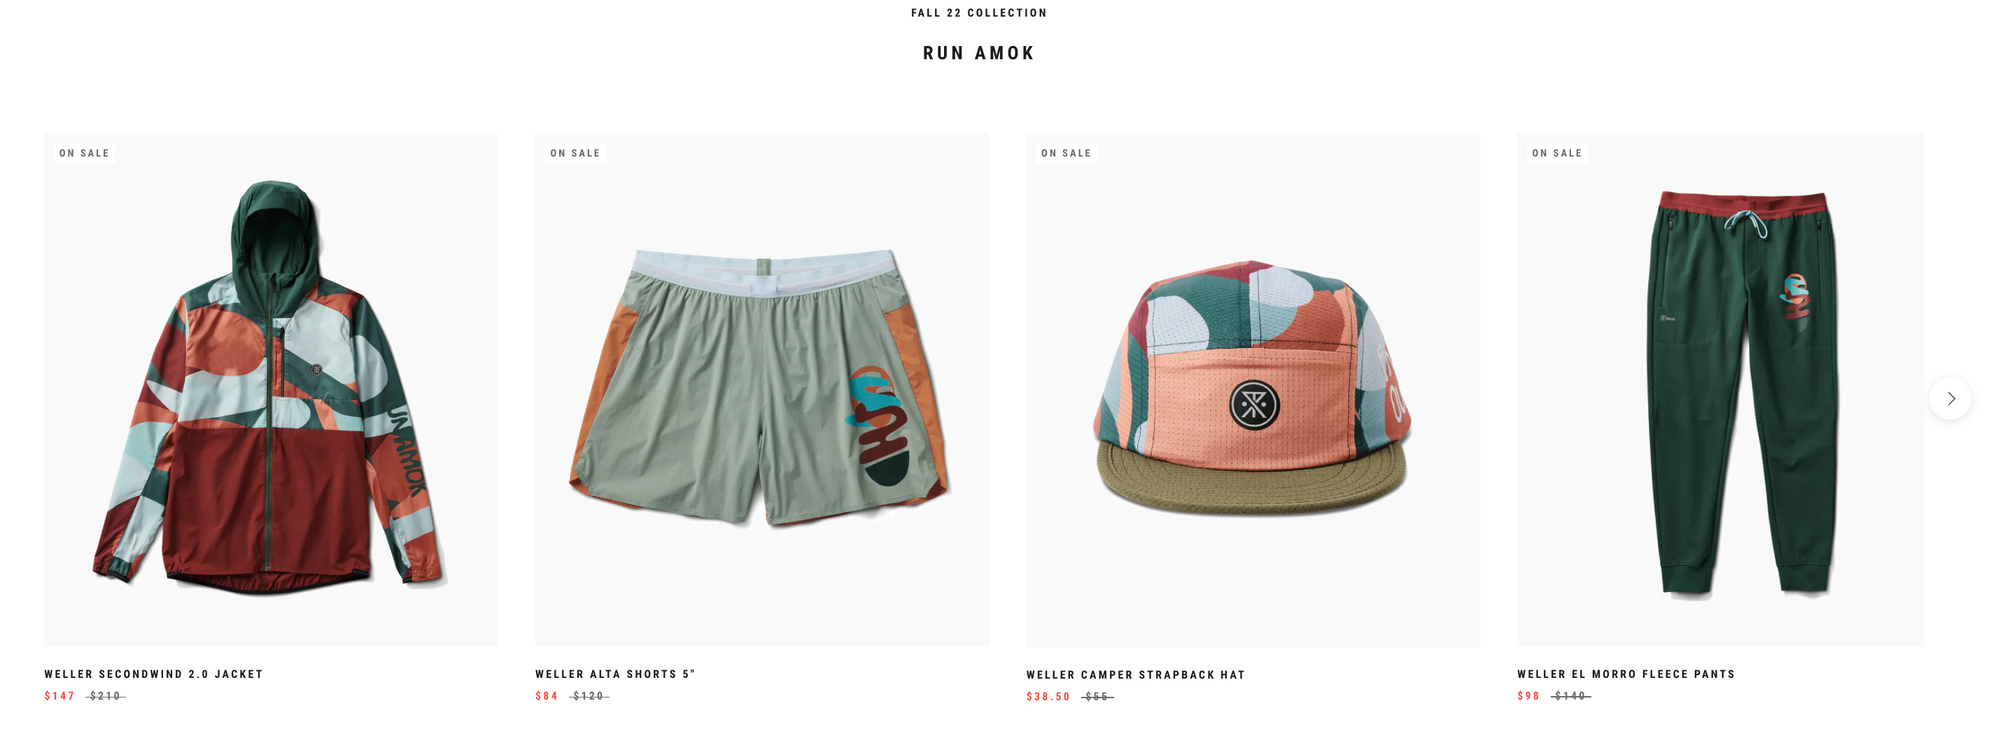 Run Amok, uses a carousel view to showcase products from their fall collection in a visually engaging way